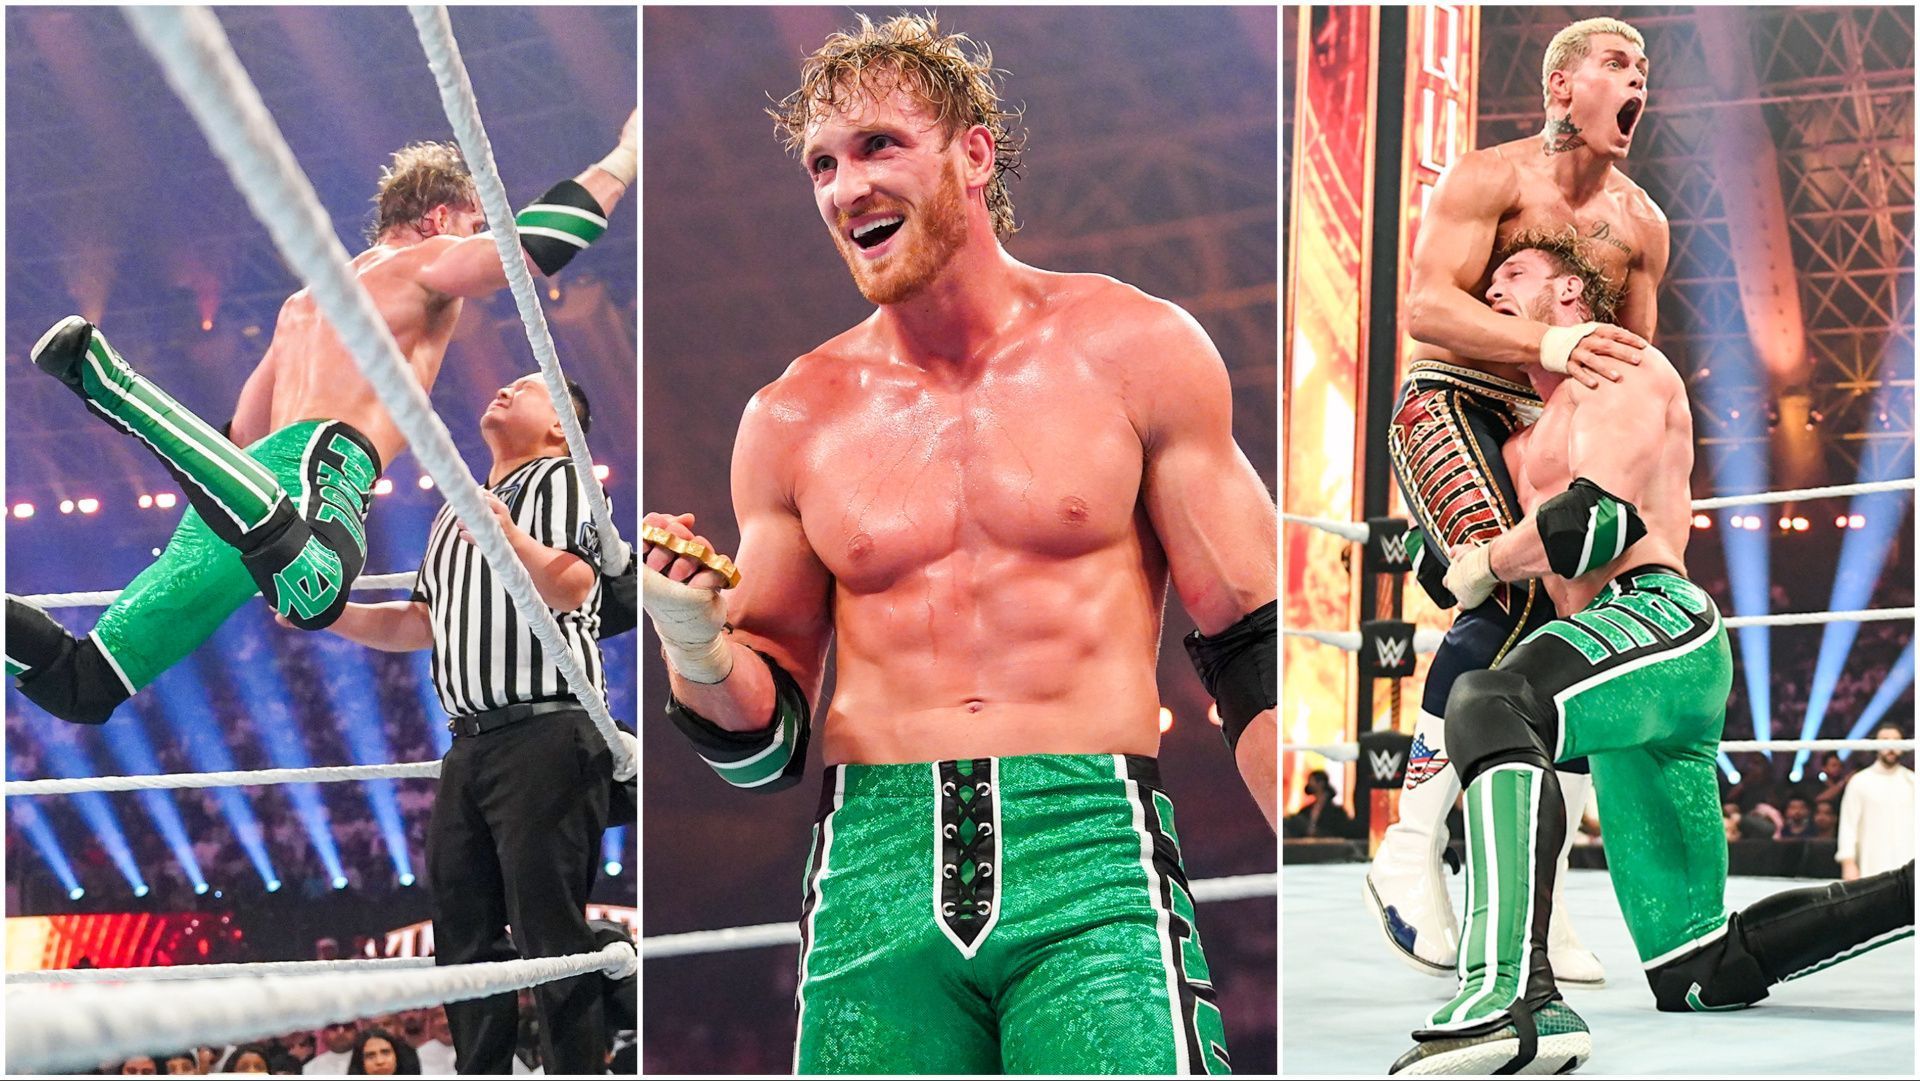 Logan Paul loses to Cody Rhodes at WWE King and Queen of the Ring